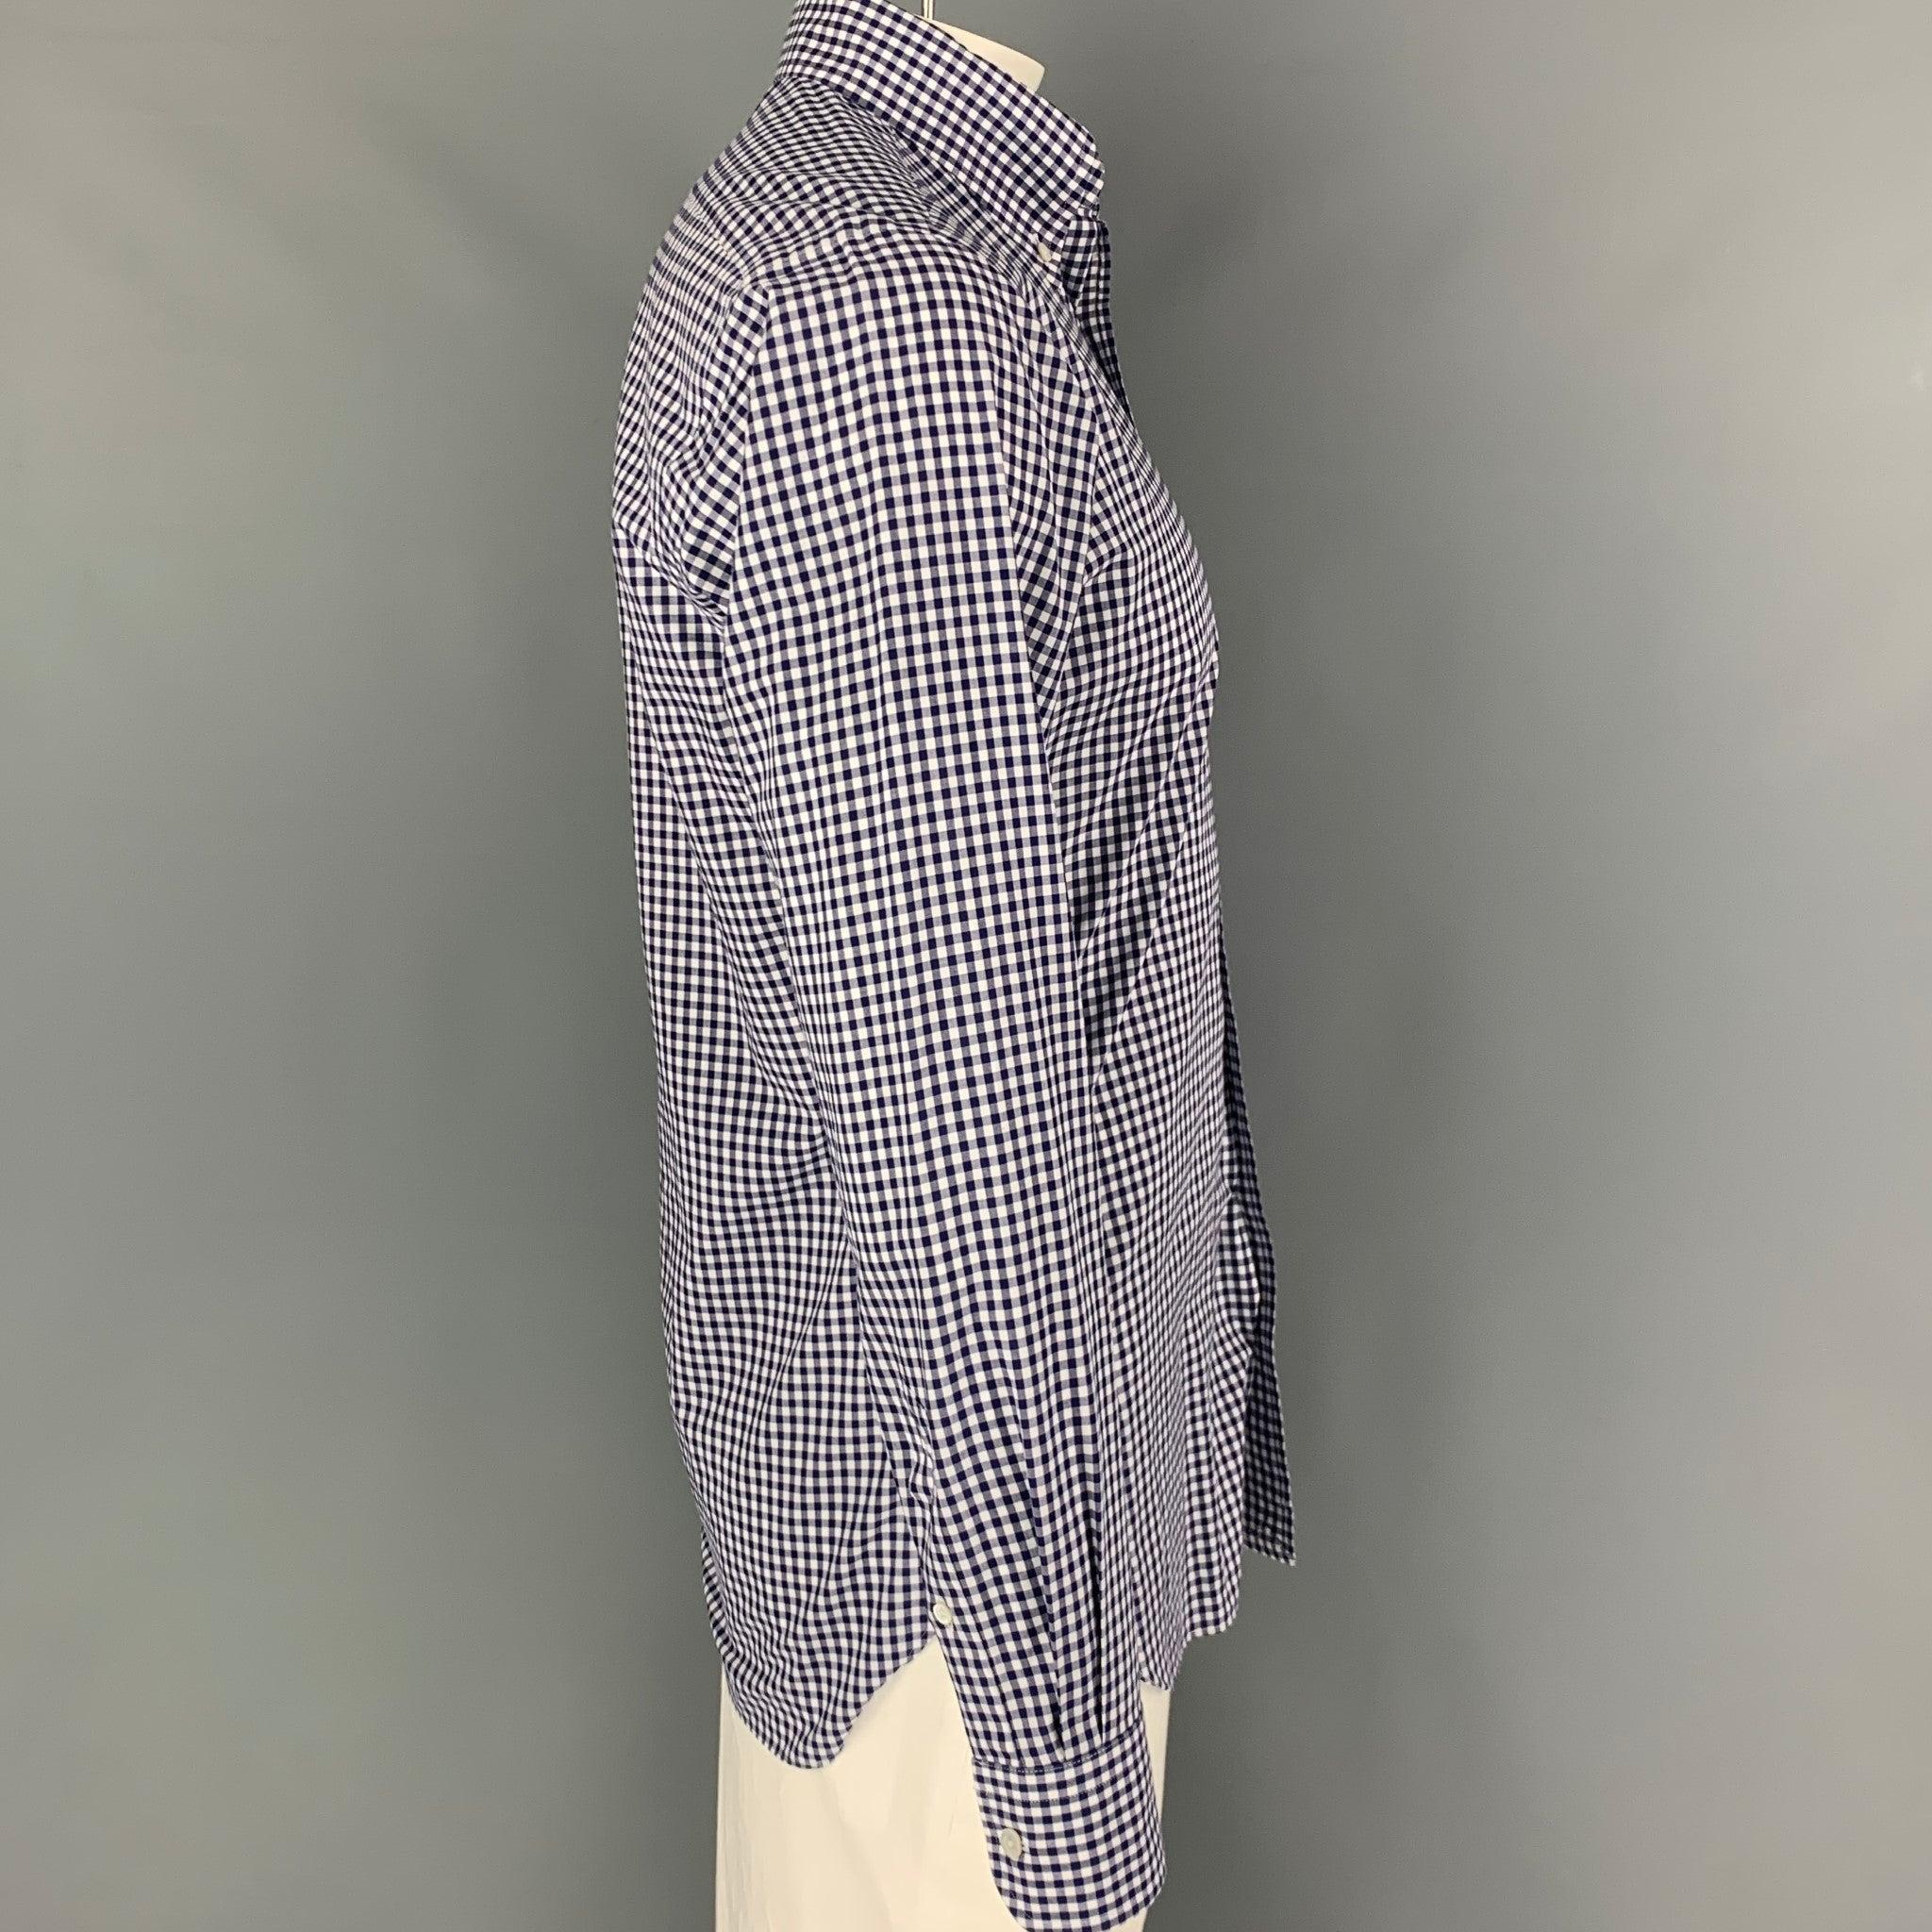 HAMILTON long sleeve shirt comes in a navy & white gingham material featuring a classic style, button down collar, and a button up closure. Excellent
Pre-Owned Condition. Fabric tag removed.  

Marked:   MARCH18  

Measurements: 
 
Shoulder: 18